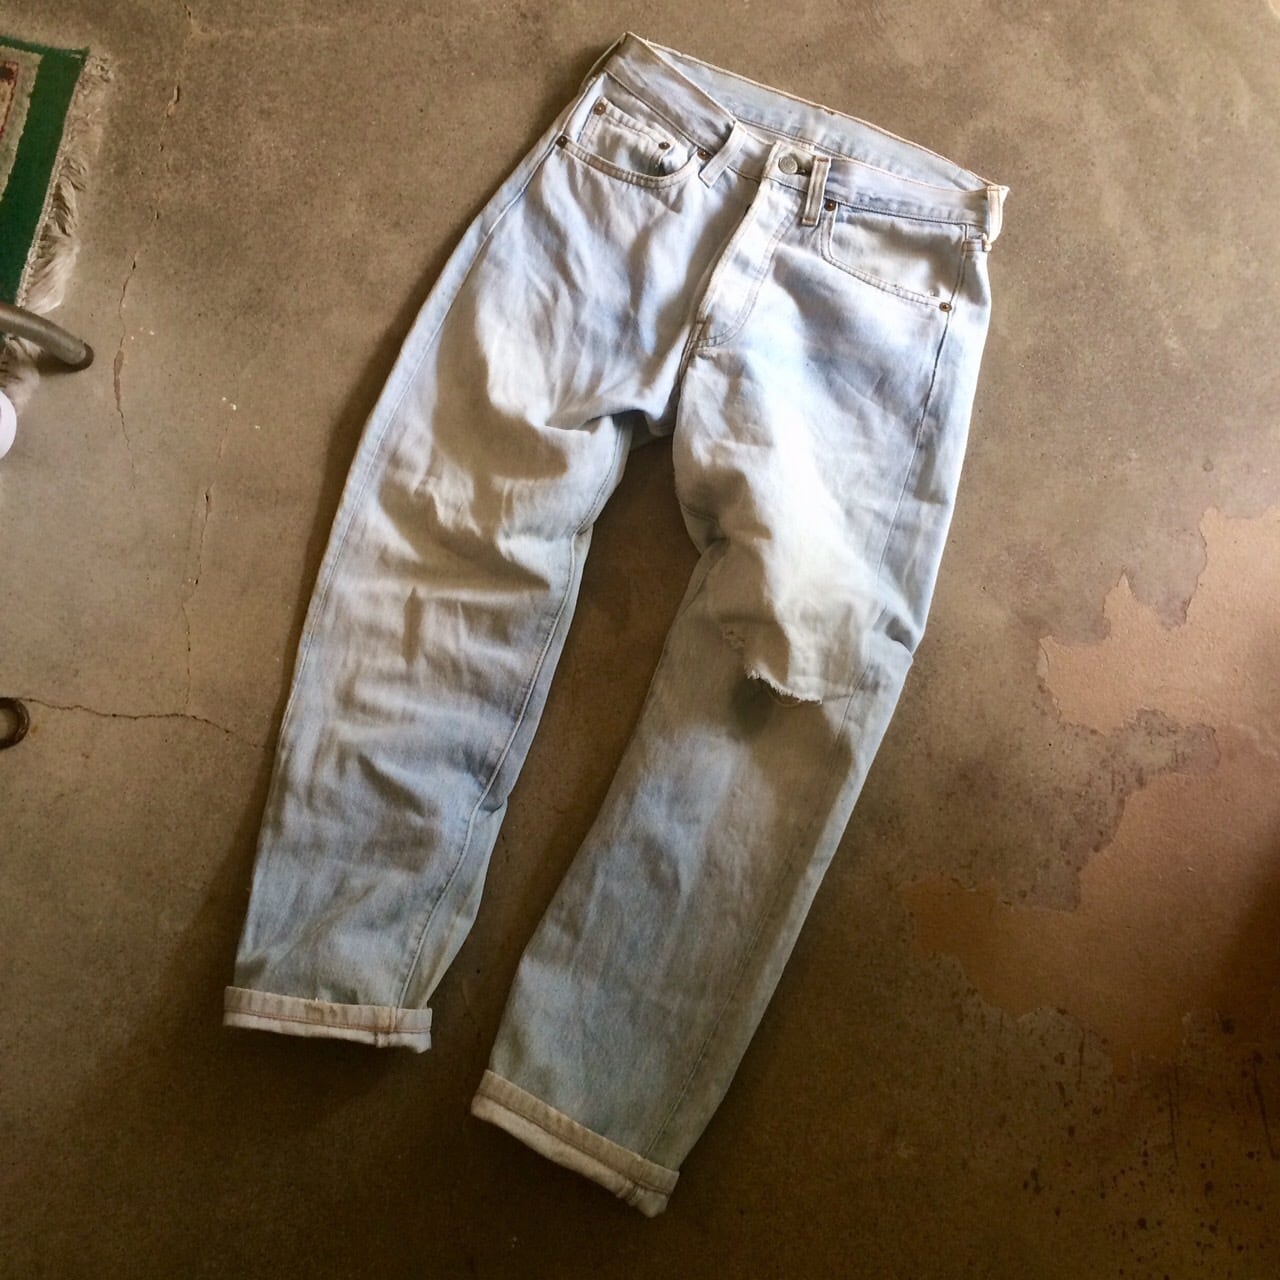 LEVI'S 501 80s MADE IN USA DENIM PANT